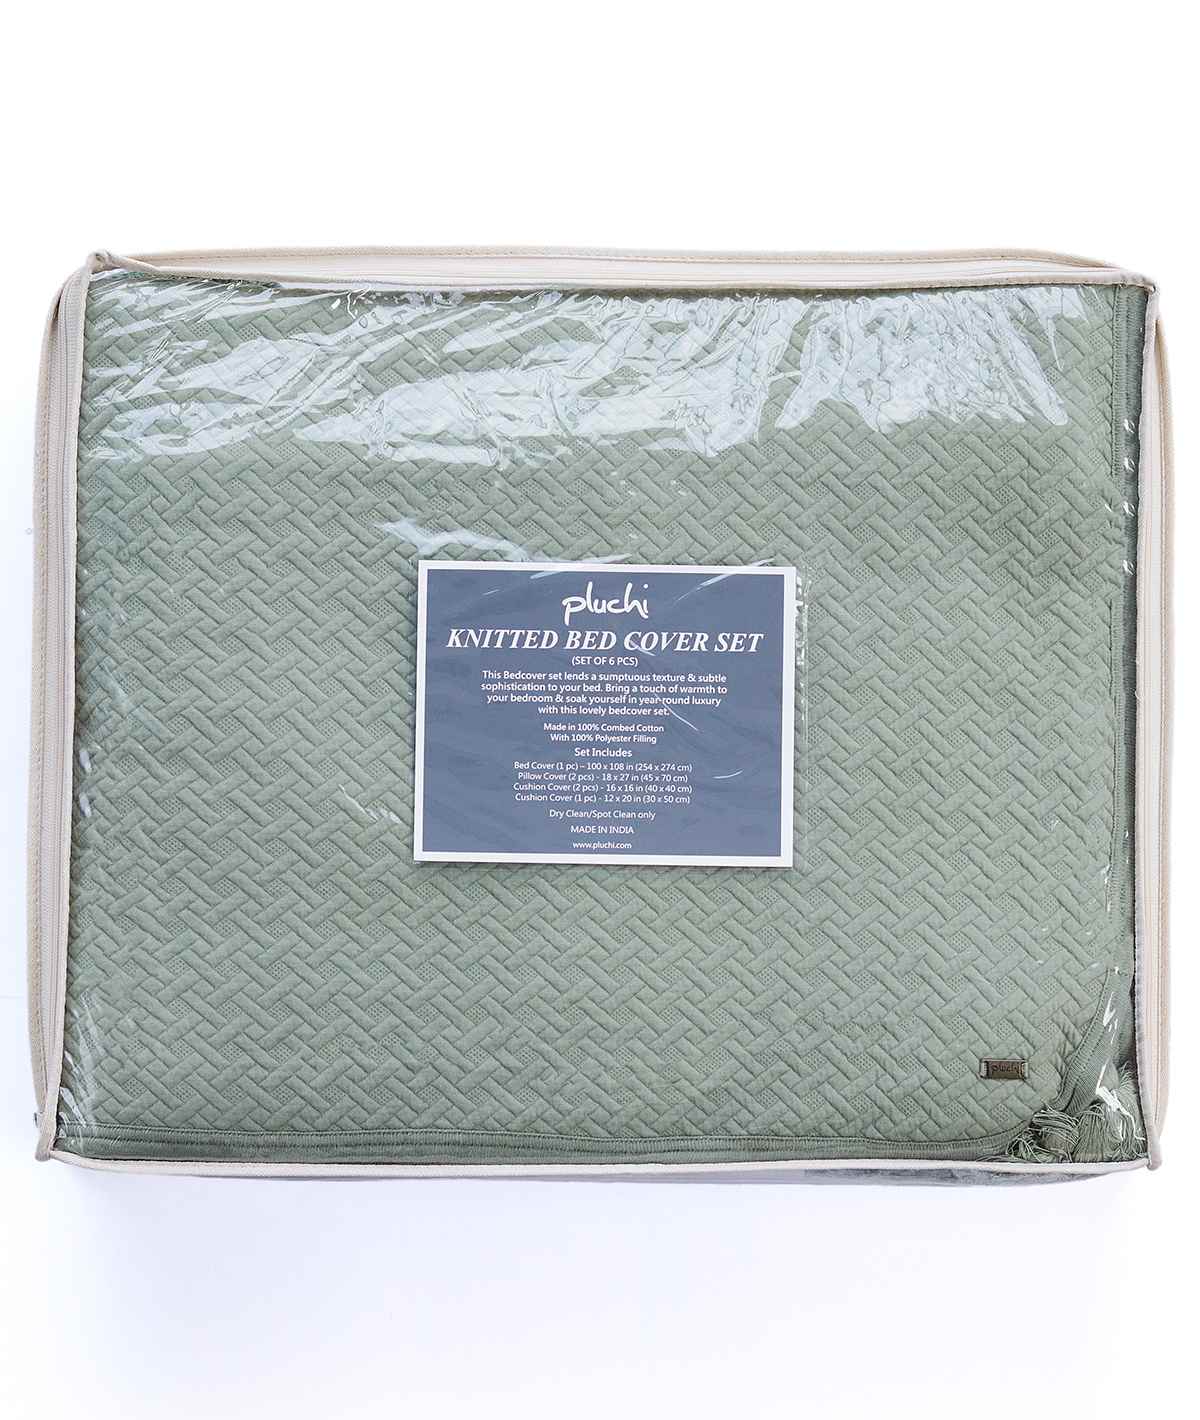 buy Bed Cover online in india